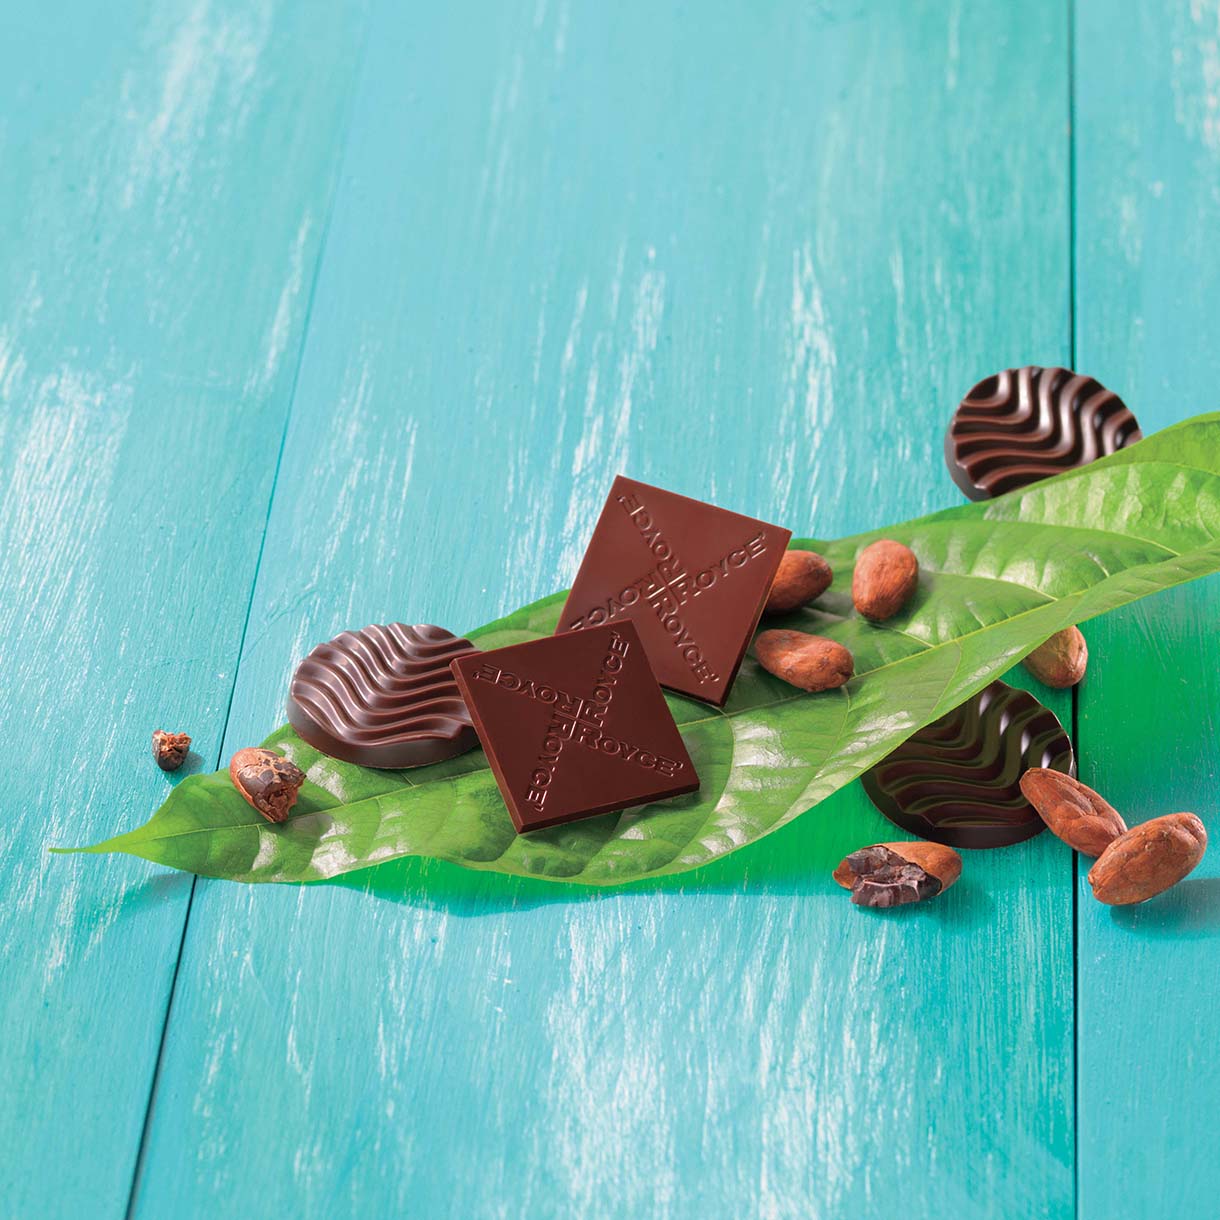 Image shows chocolate discs and square on a leaf with cacao beans.